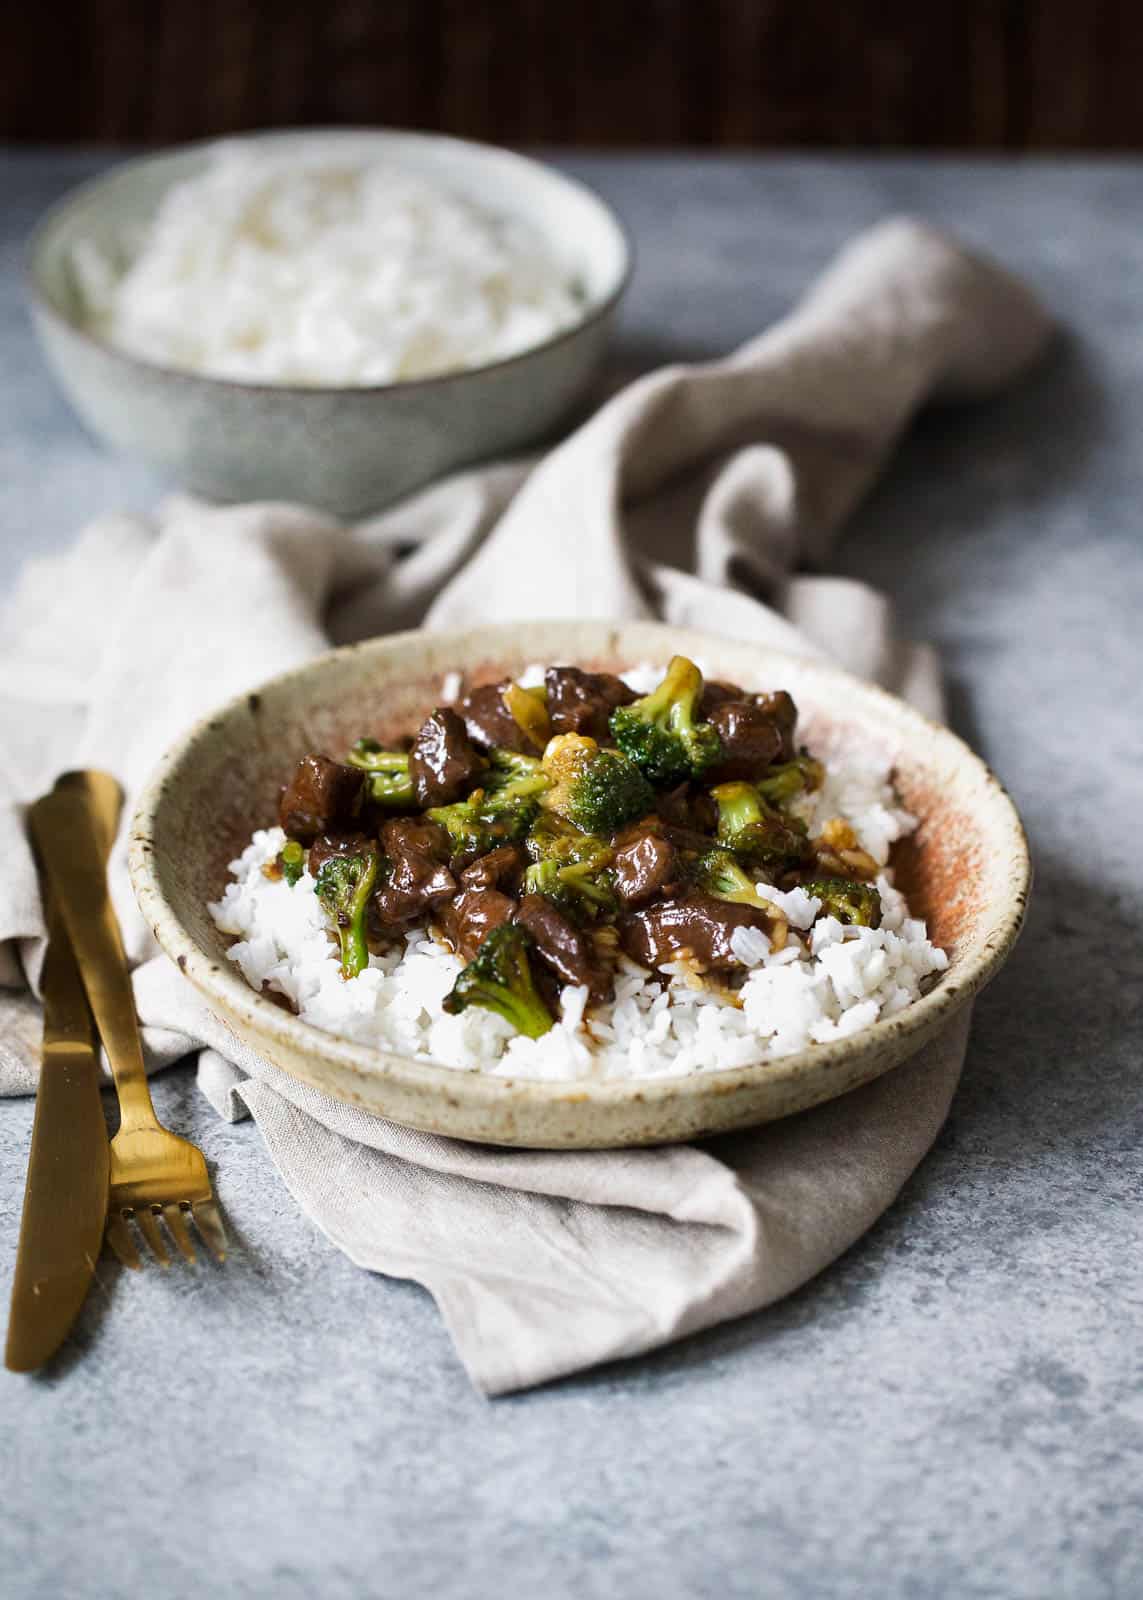 Slow cooker beef and broccoli is easy to make at home and such a warm comforting meal to have in a big bowl of rice! Much better than calling take-out; simply whip out your slow cooker and make this beef and broccoli at home!